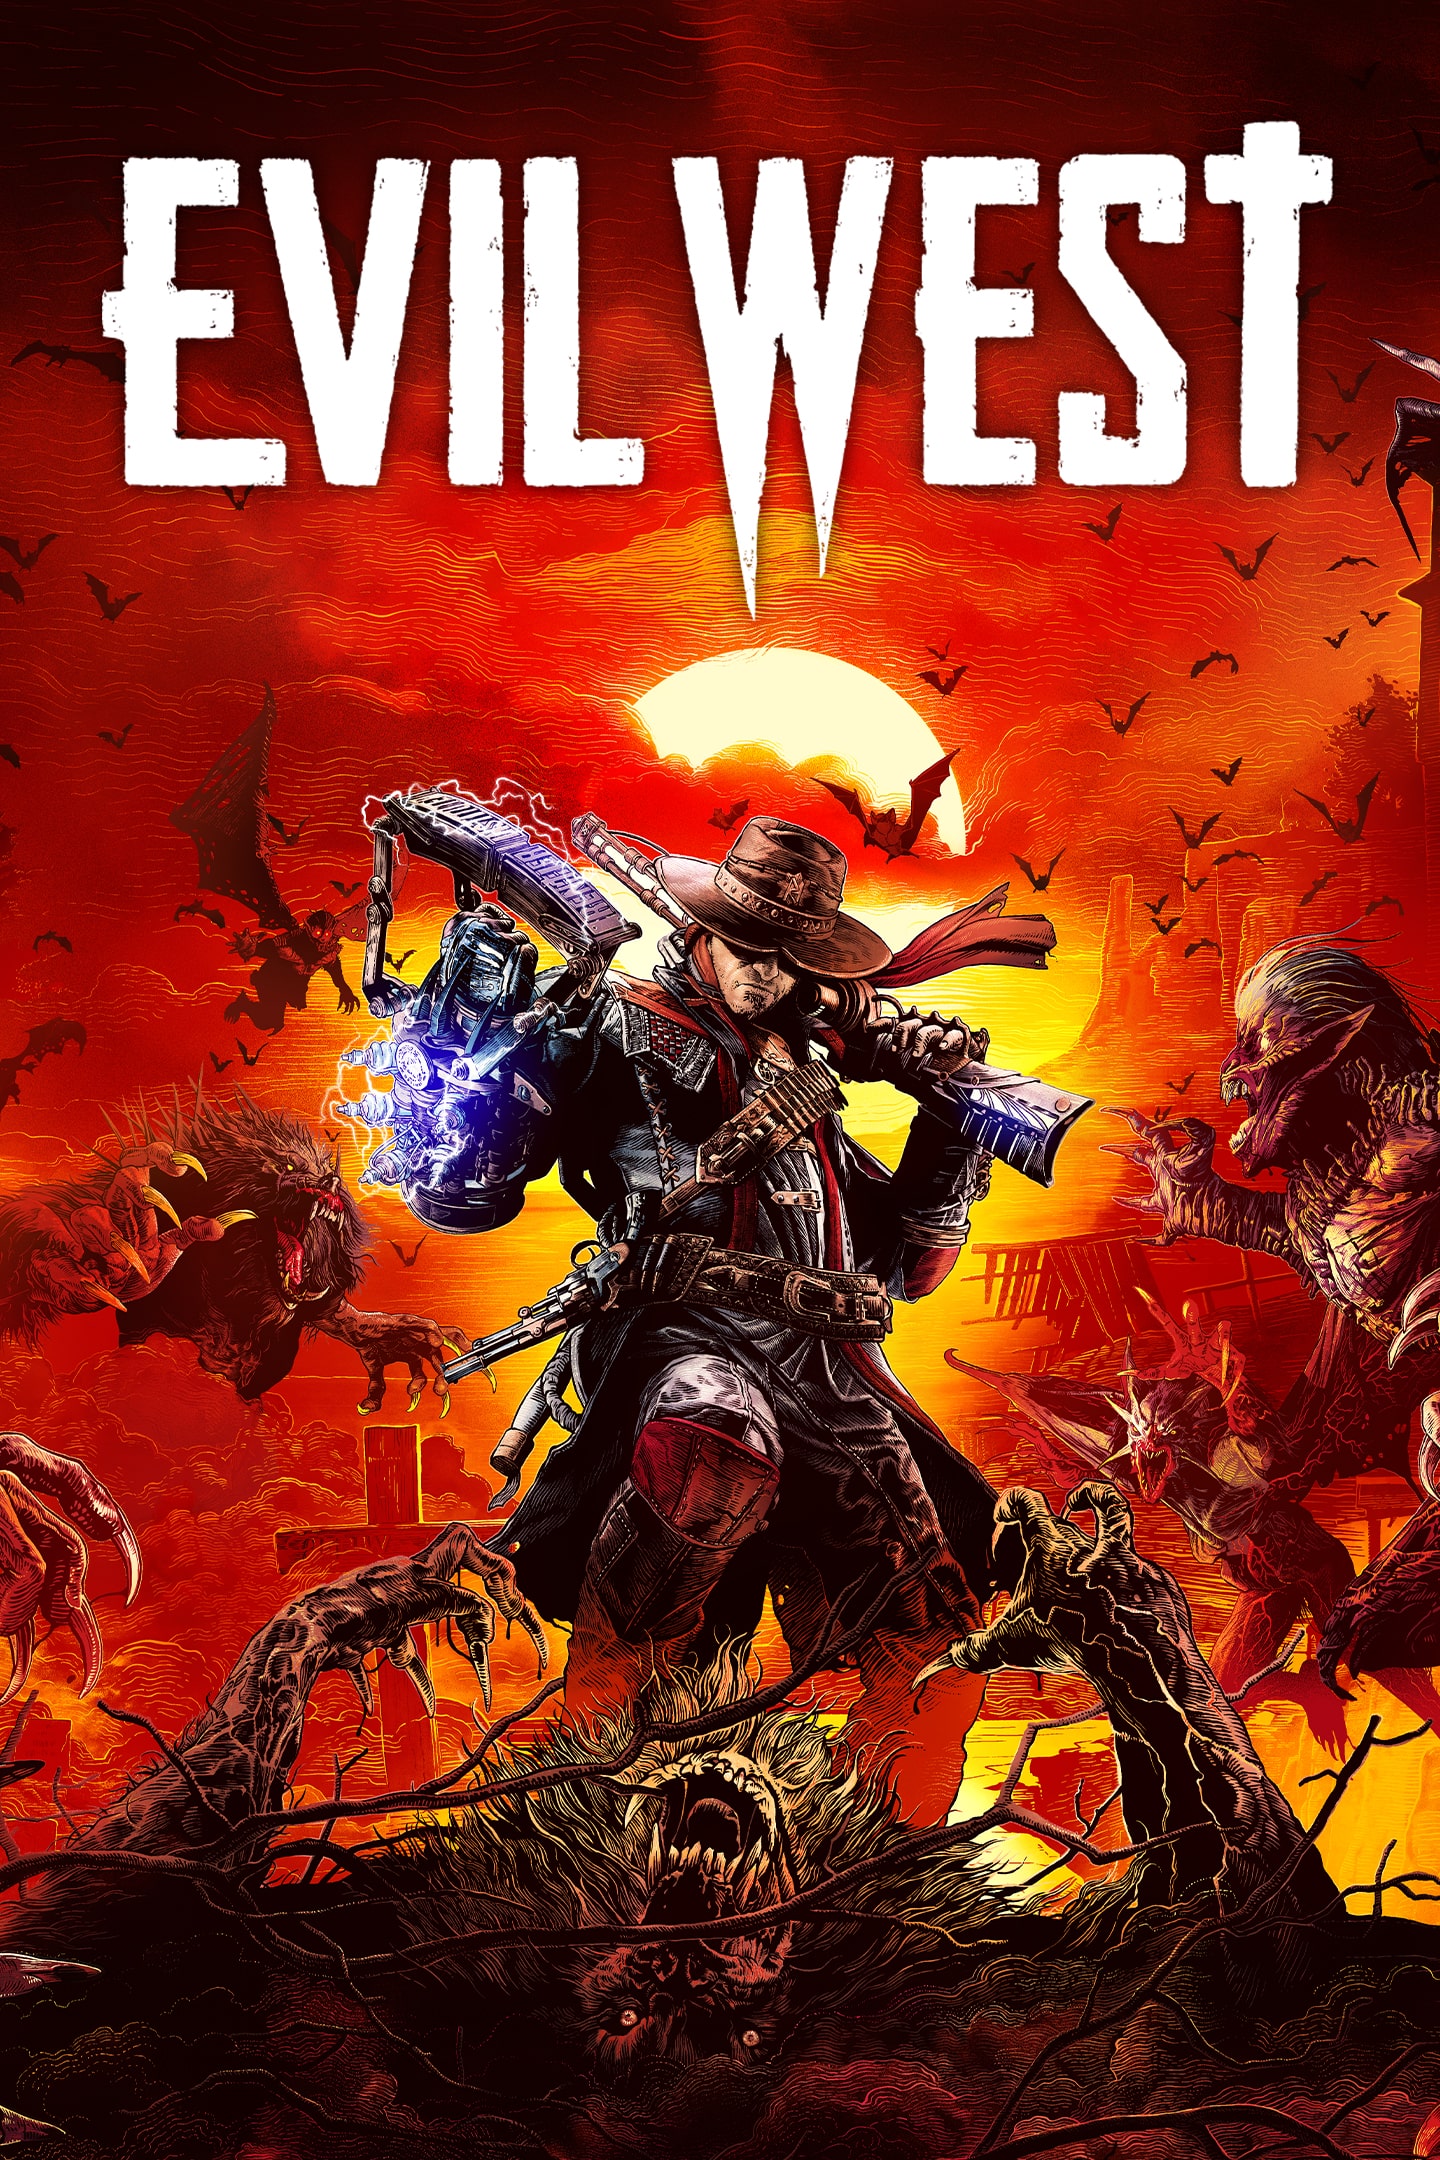 Sony PlayStation 4 EVIL WEST PS4 Game Deals for Platform PlayStation4 PS4  PlayStation5 PS5 Game Disks